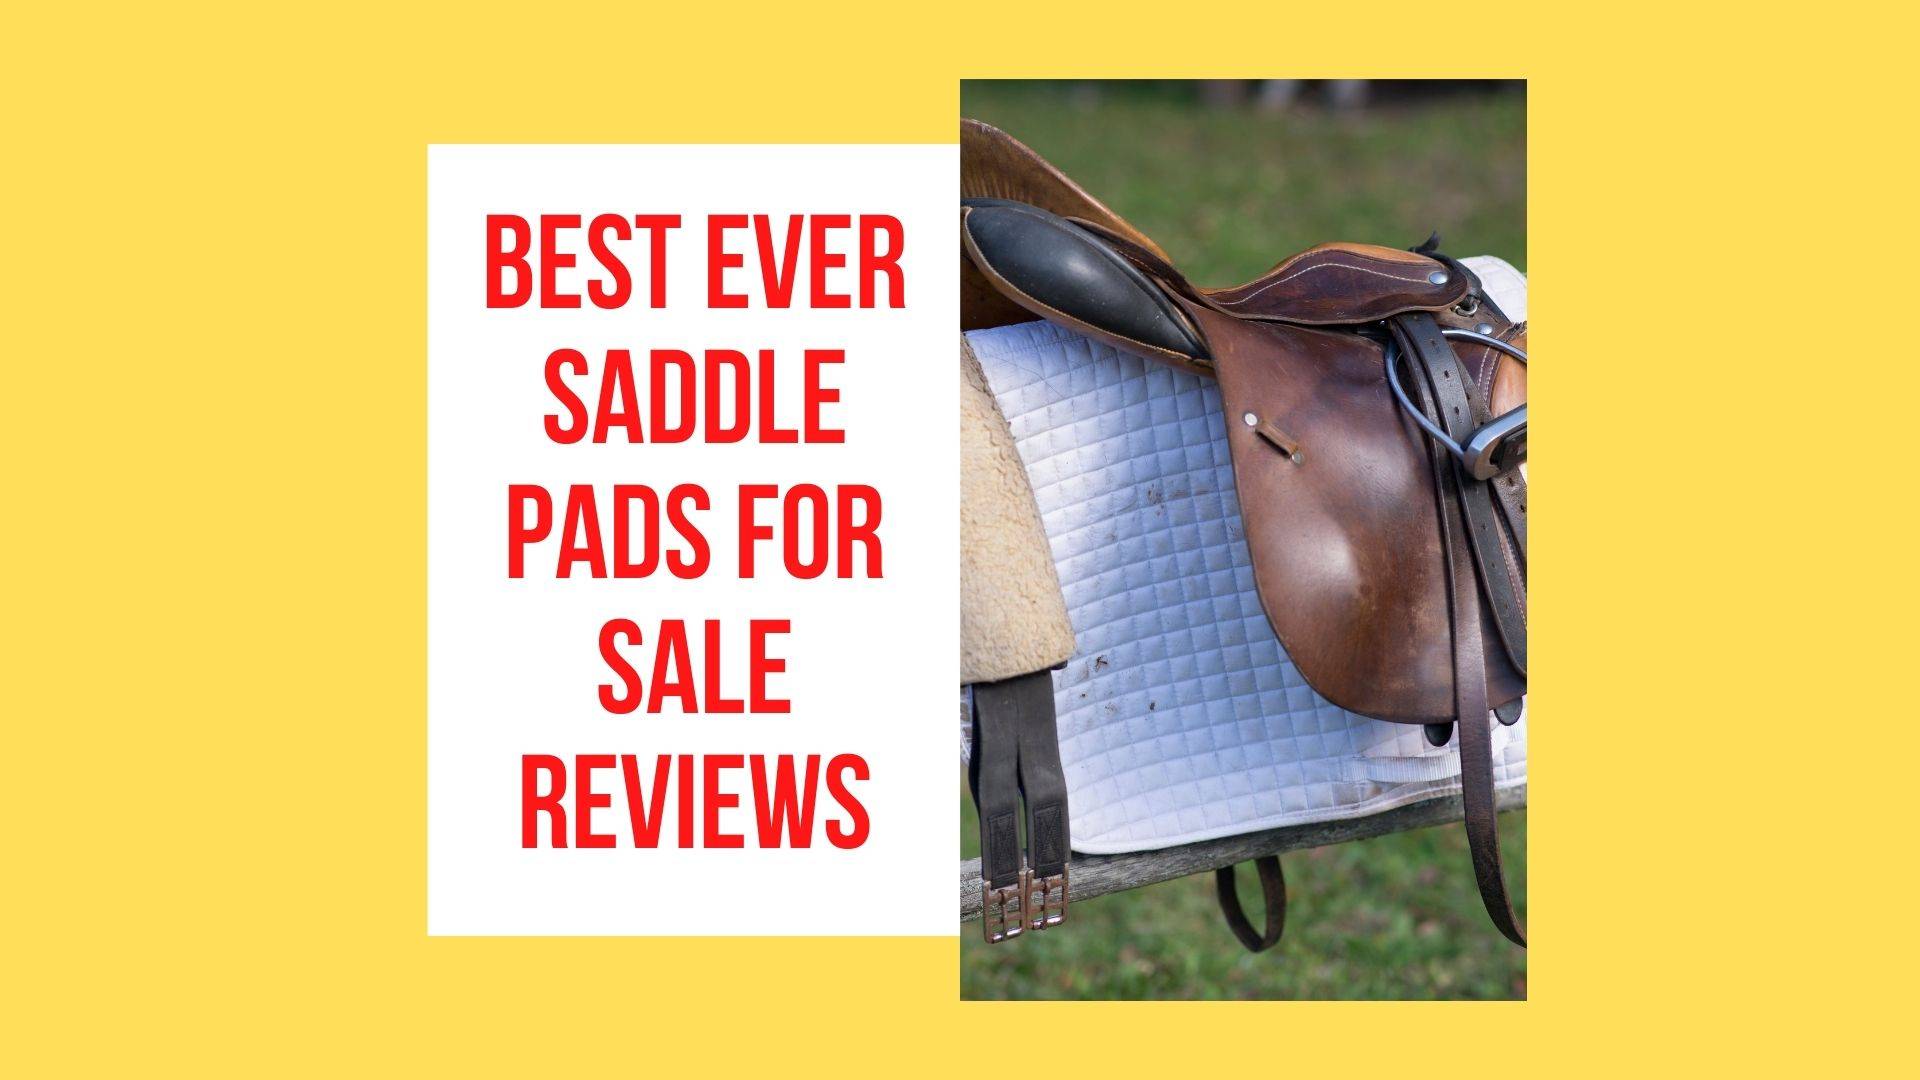 Best Ever Saddle Pads for Sale reviews